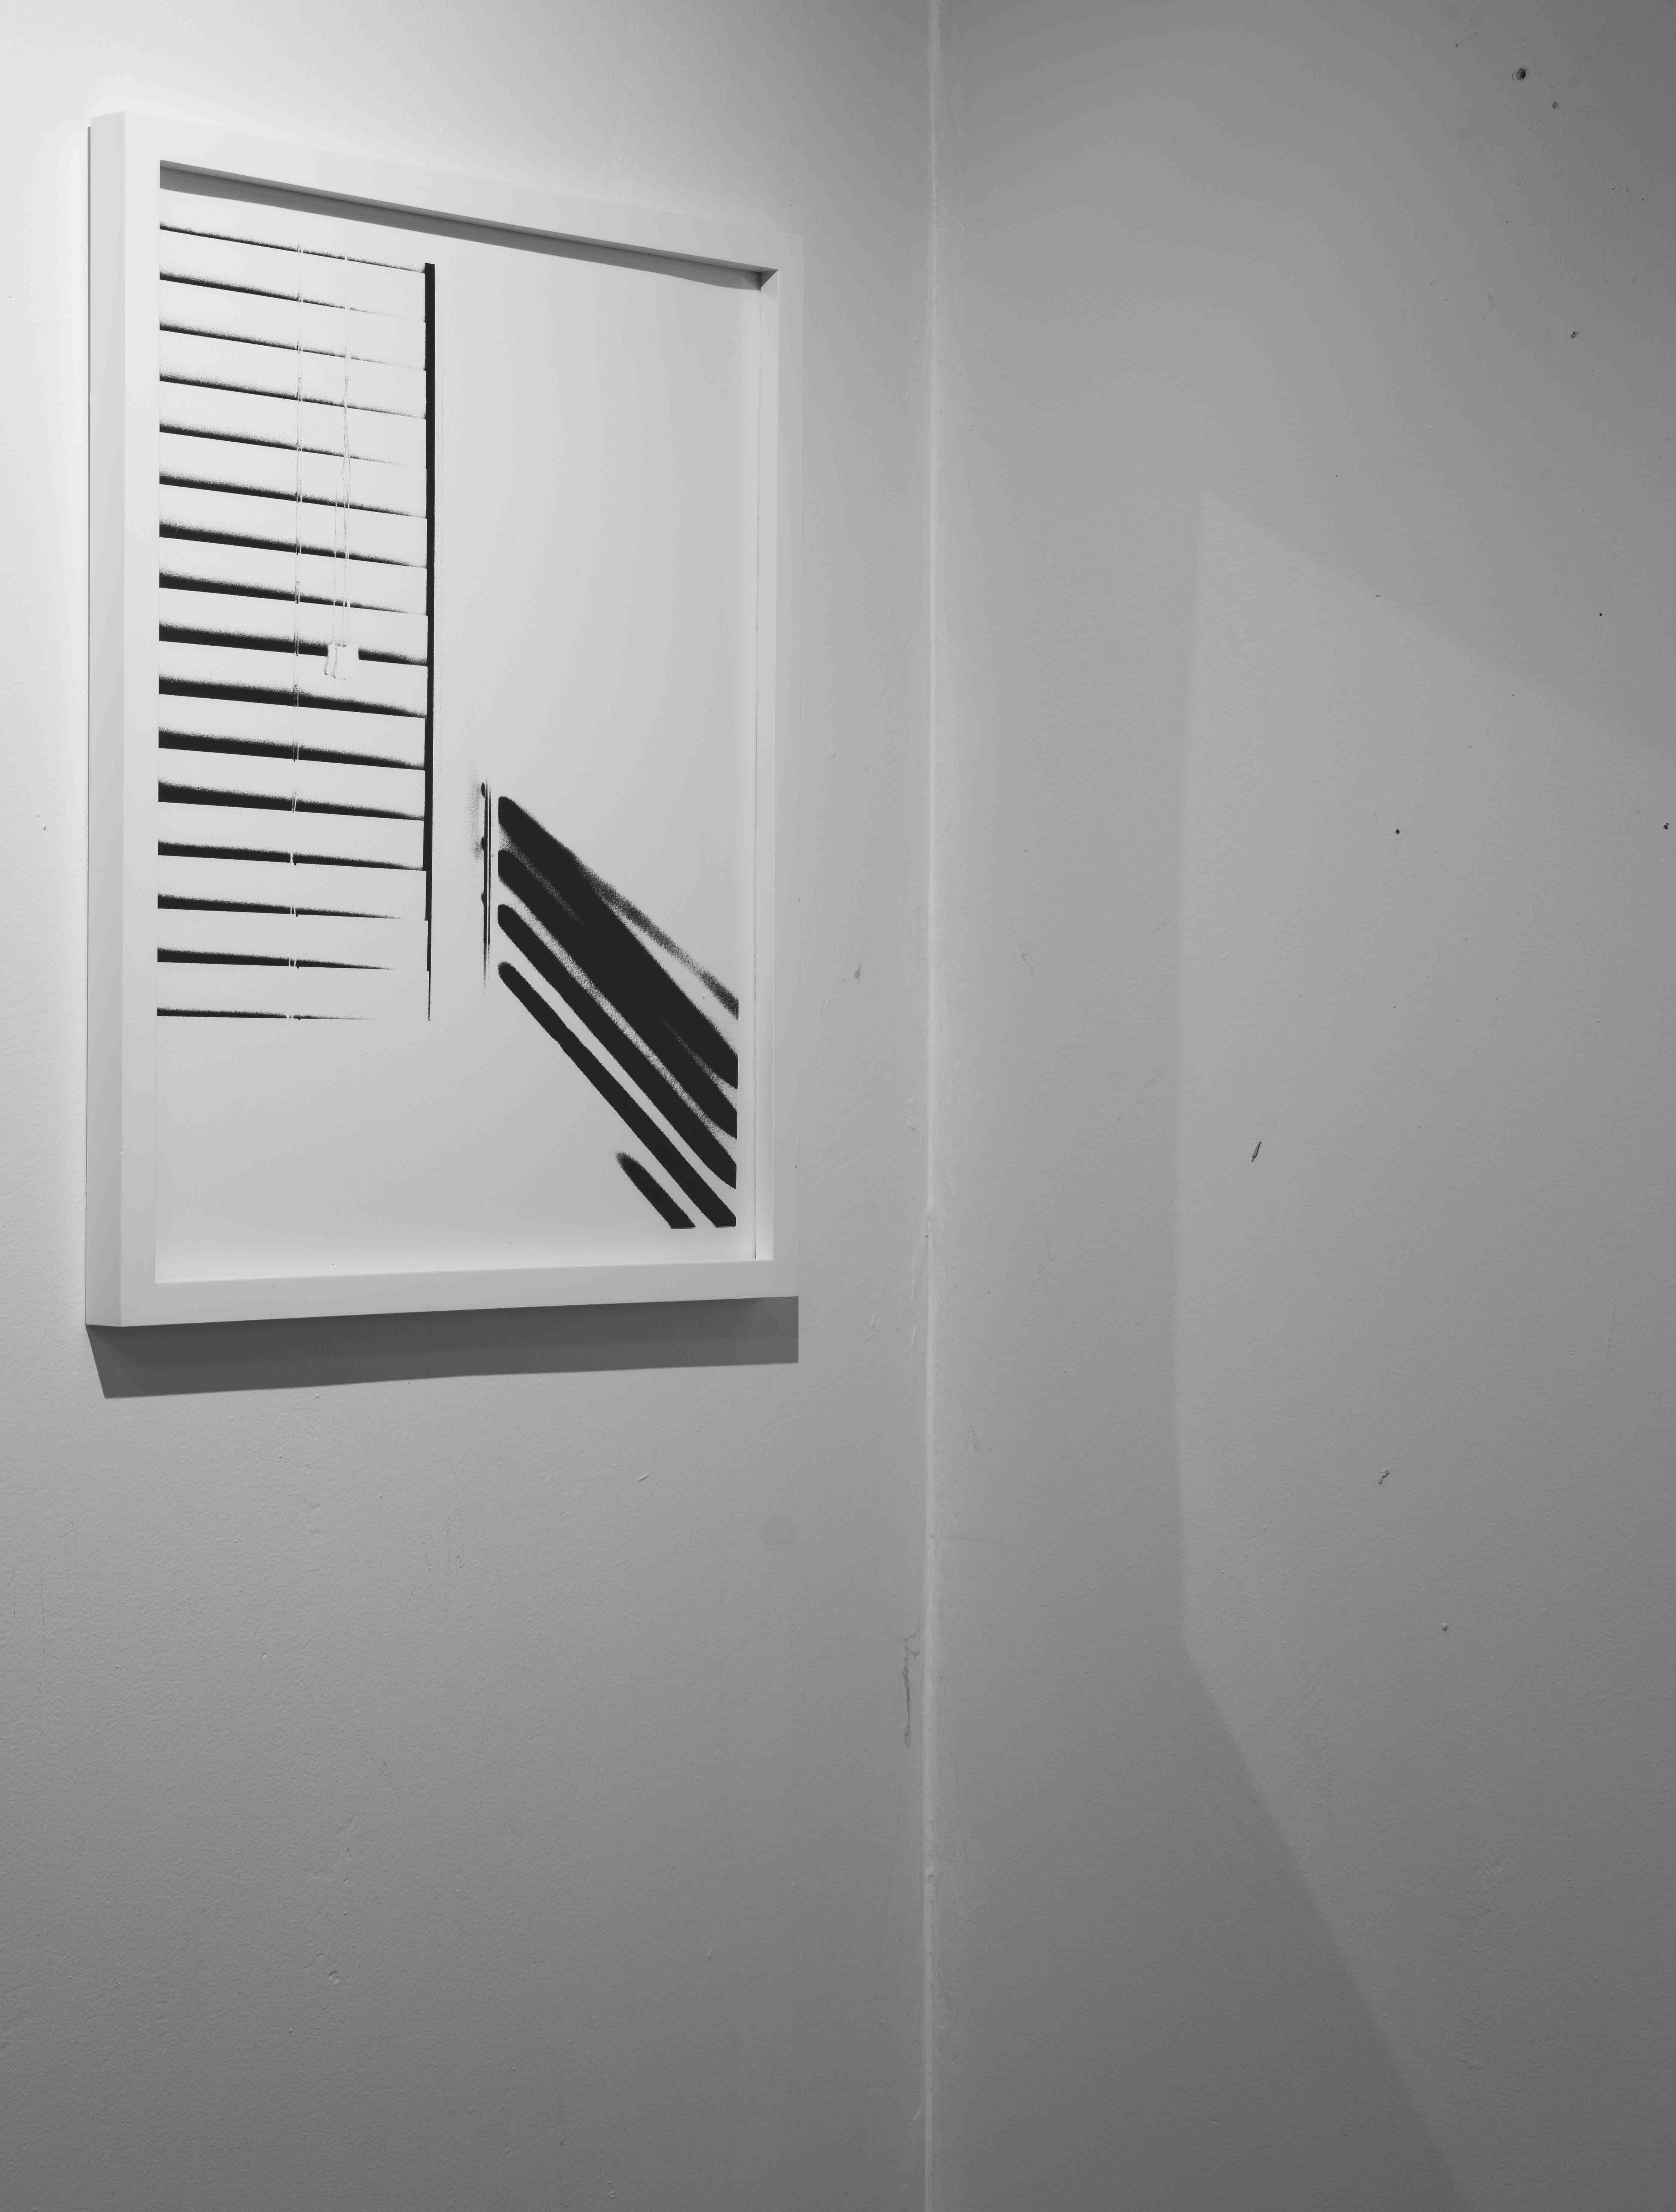 Installation view of untitled photograph